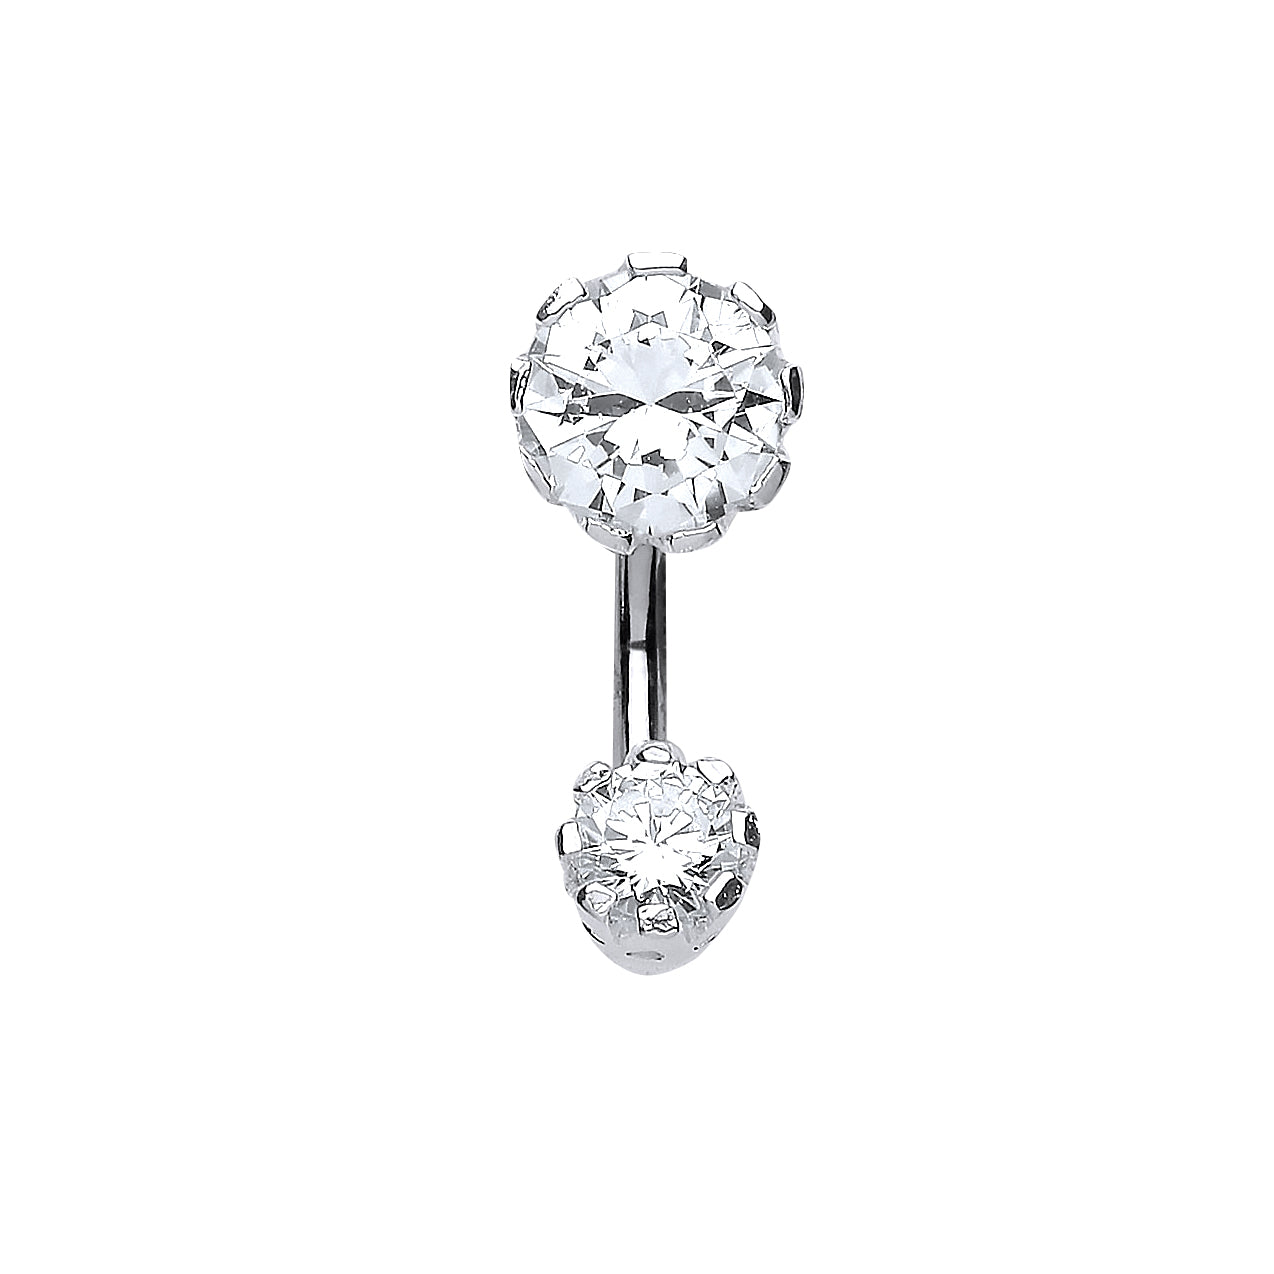 Sterling Silver  CZ Lil n Large Solitaire Banana Belly Bar - GBB47